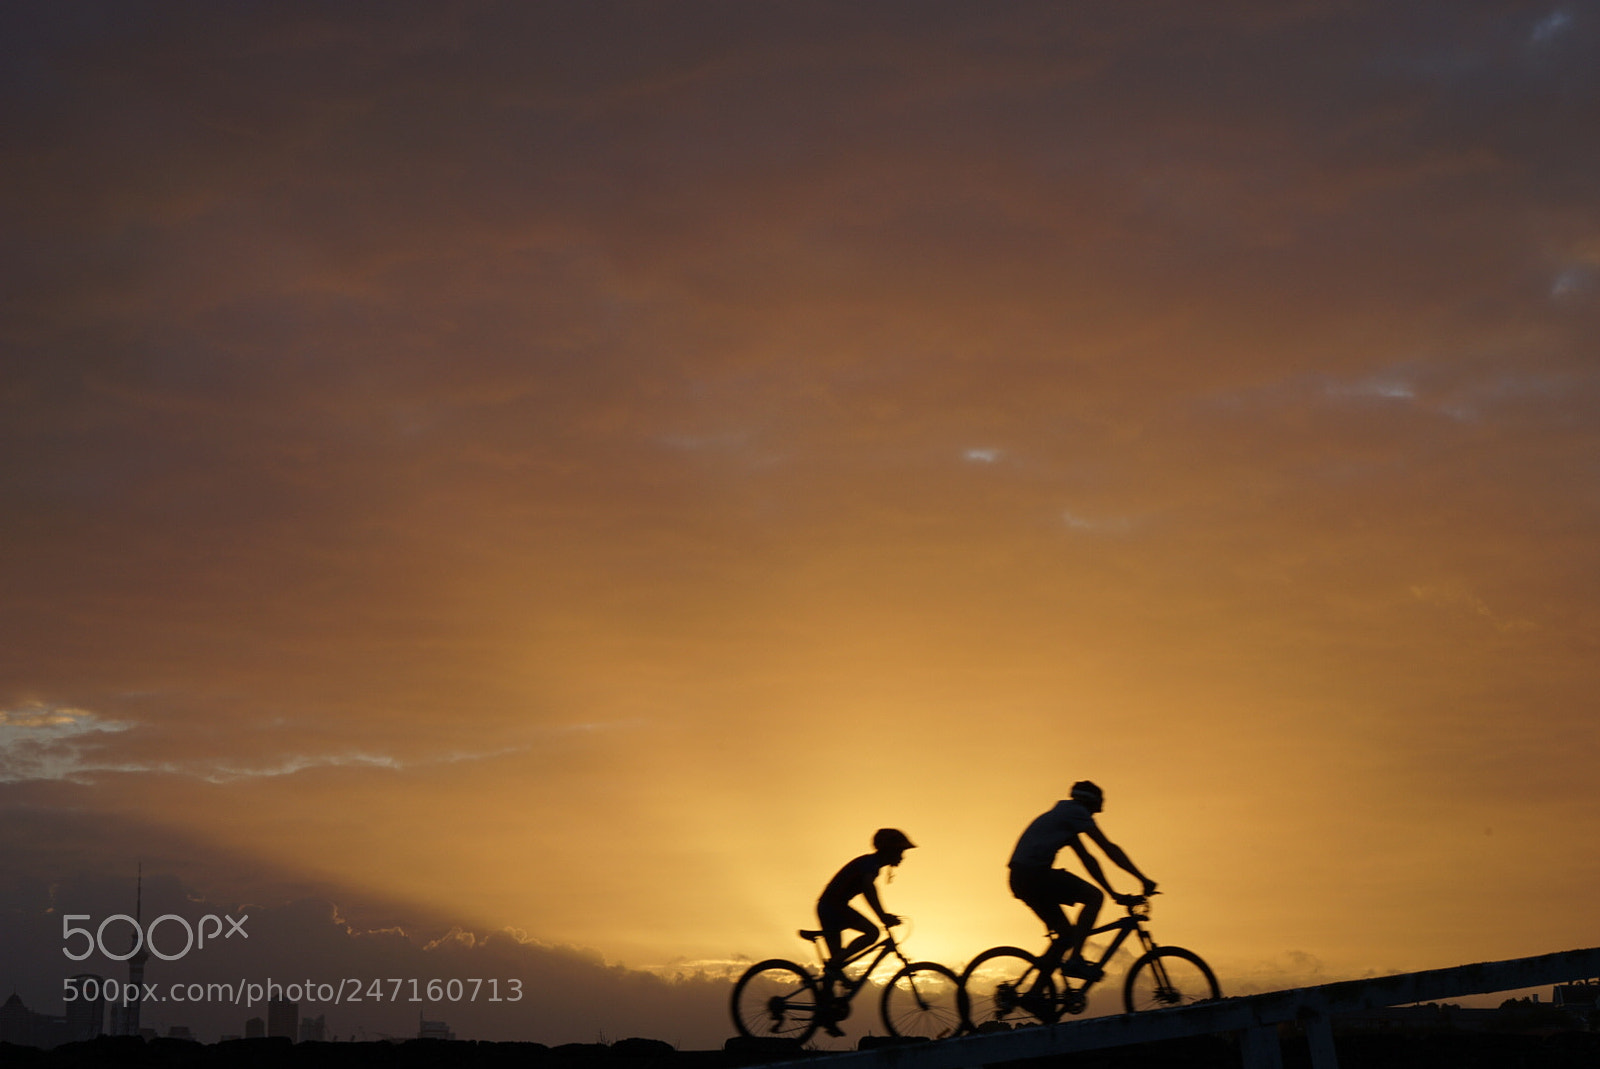 Sony a7 II sample photo. A silhouette of boys photography